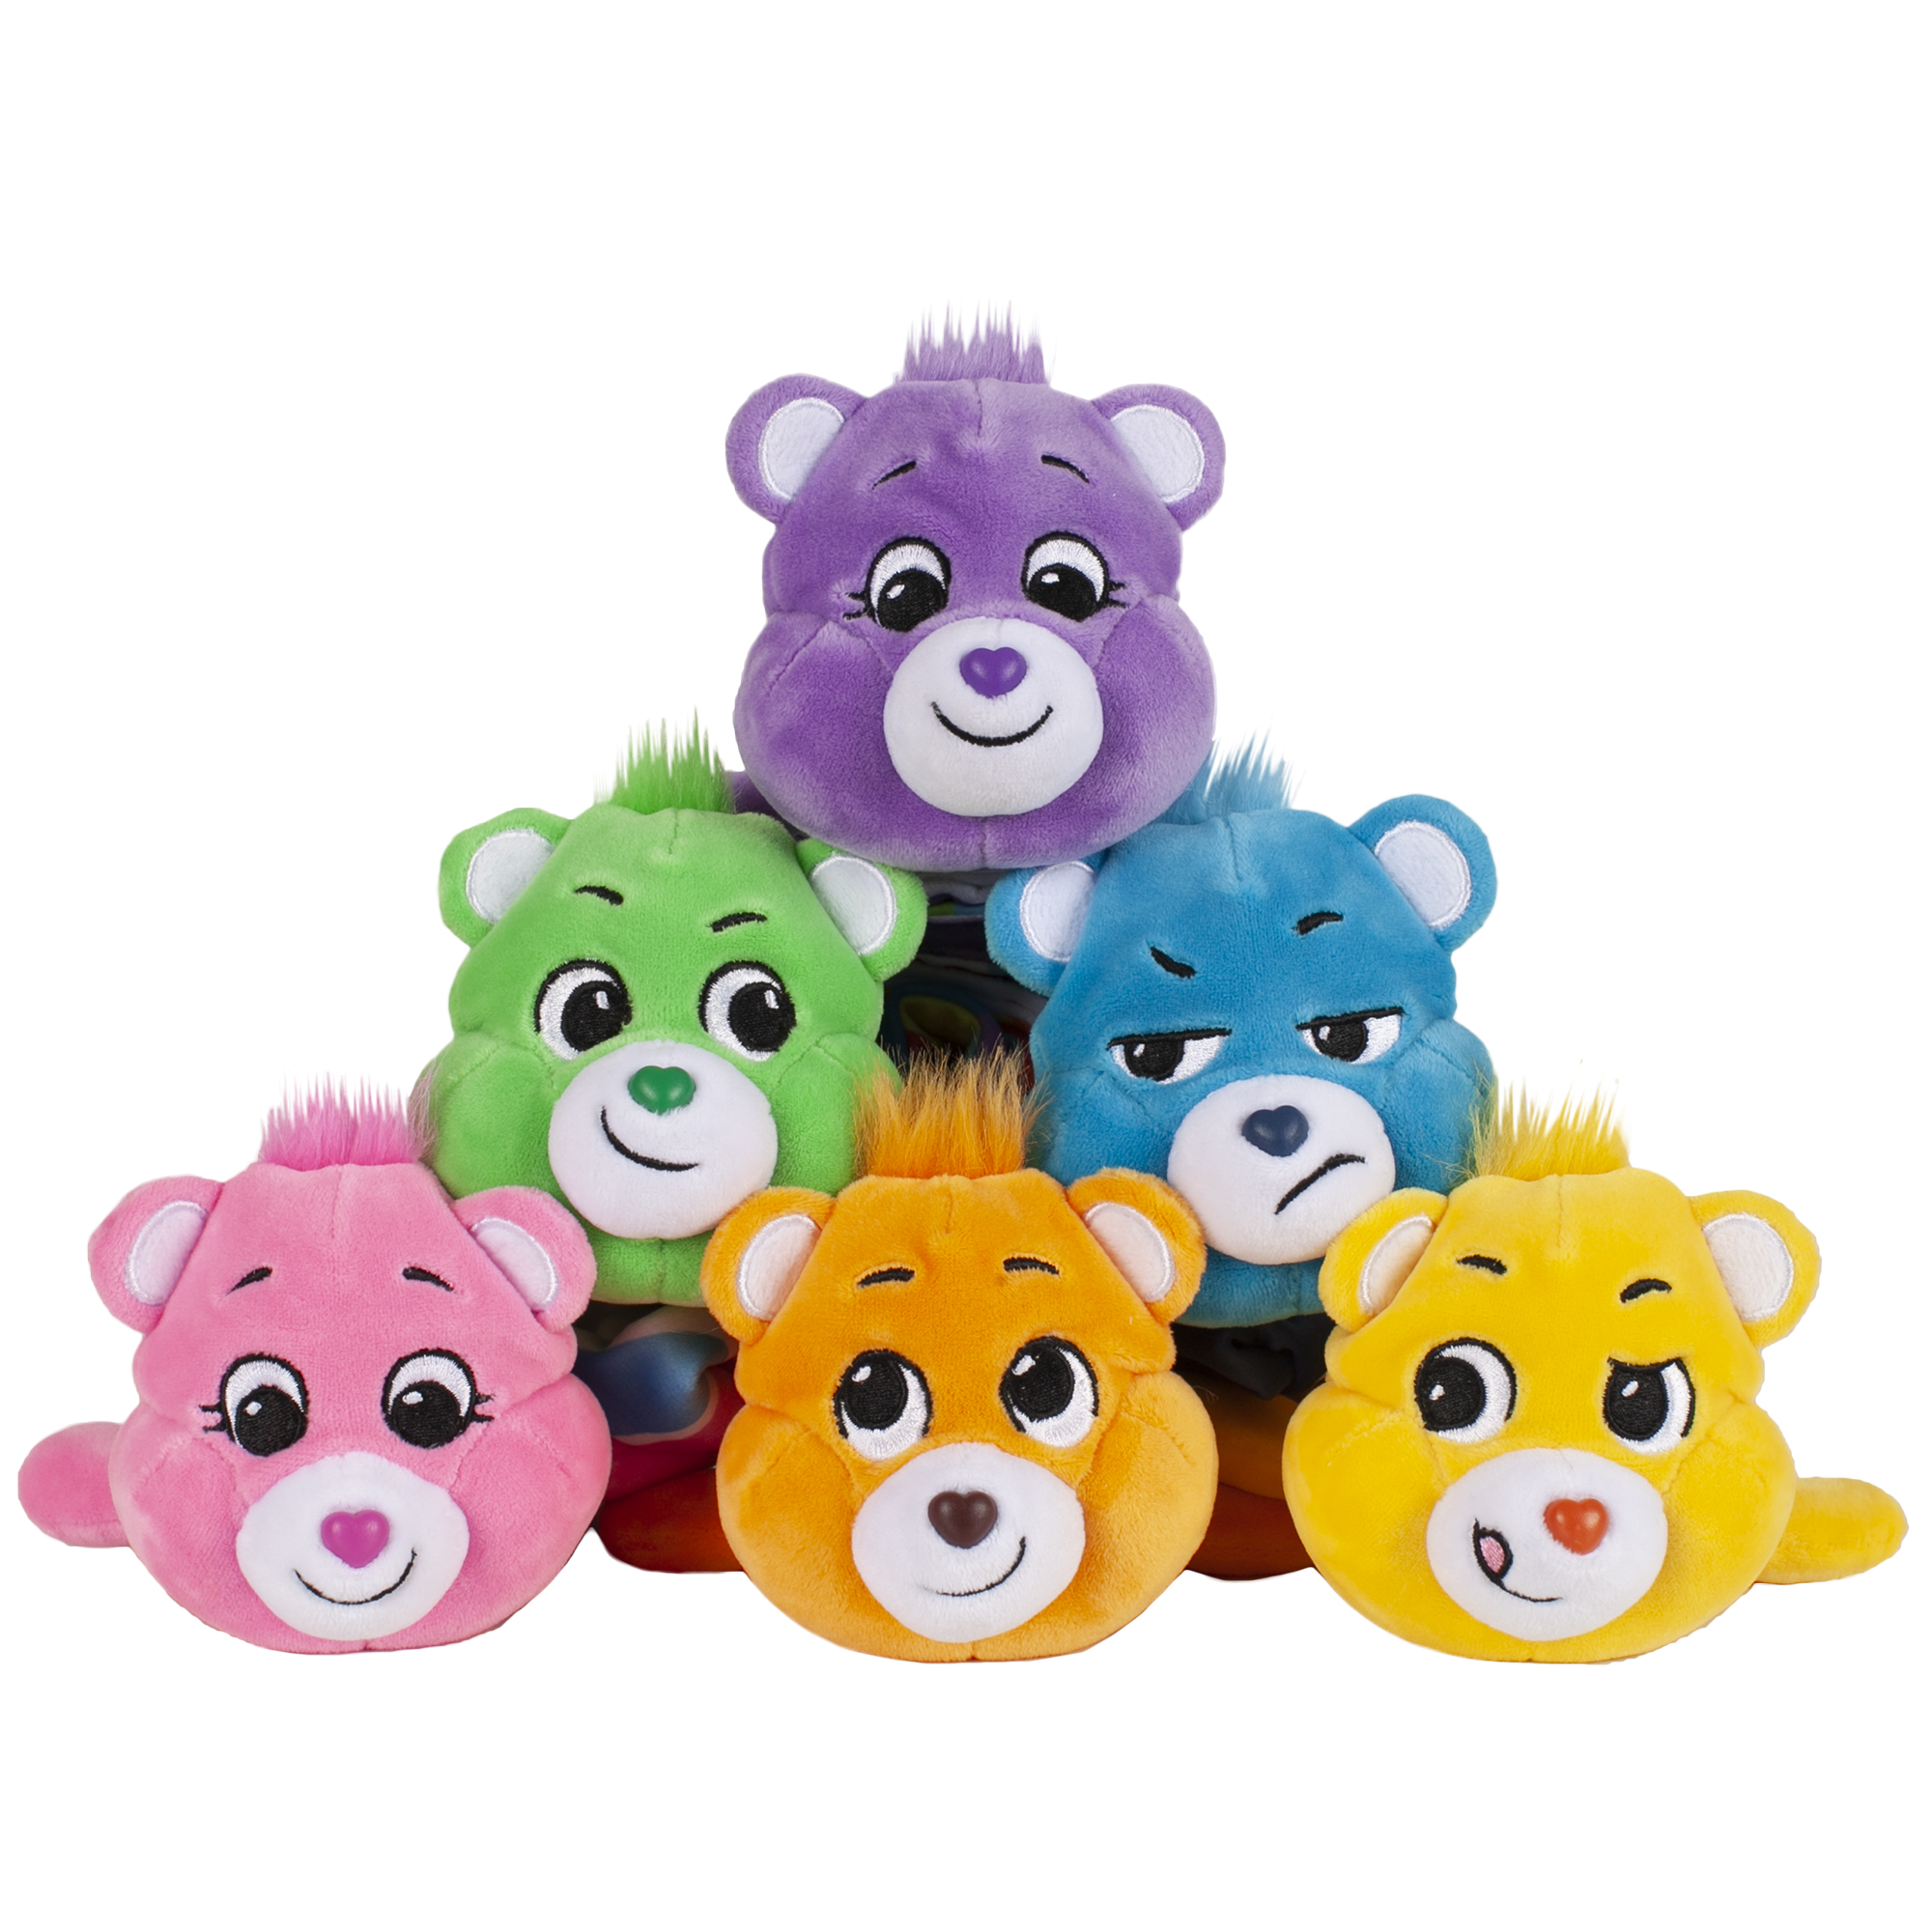 Care Bears Cutetitos-Surprise Stuffed Animals-Collectible - image 4 of 5